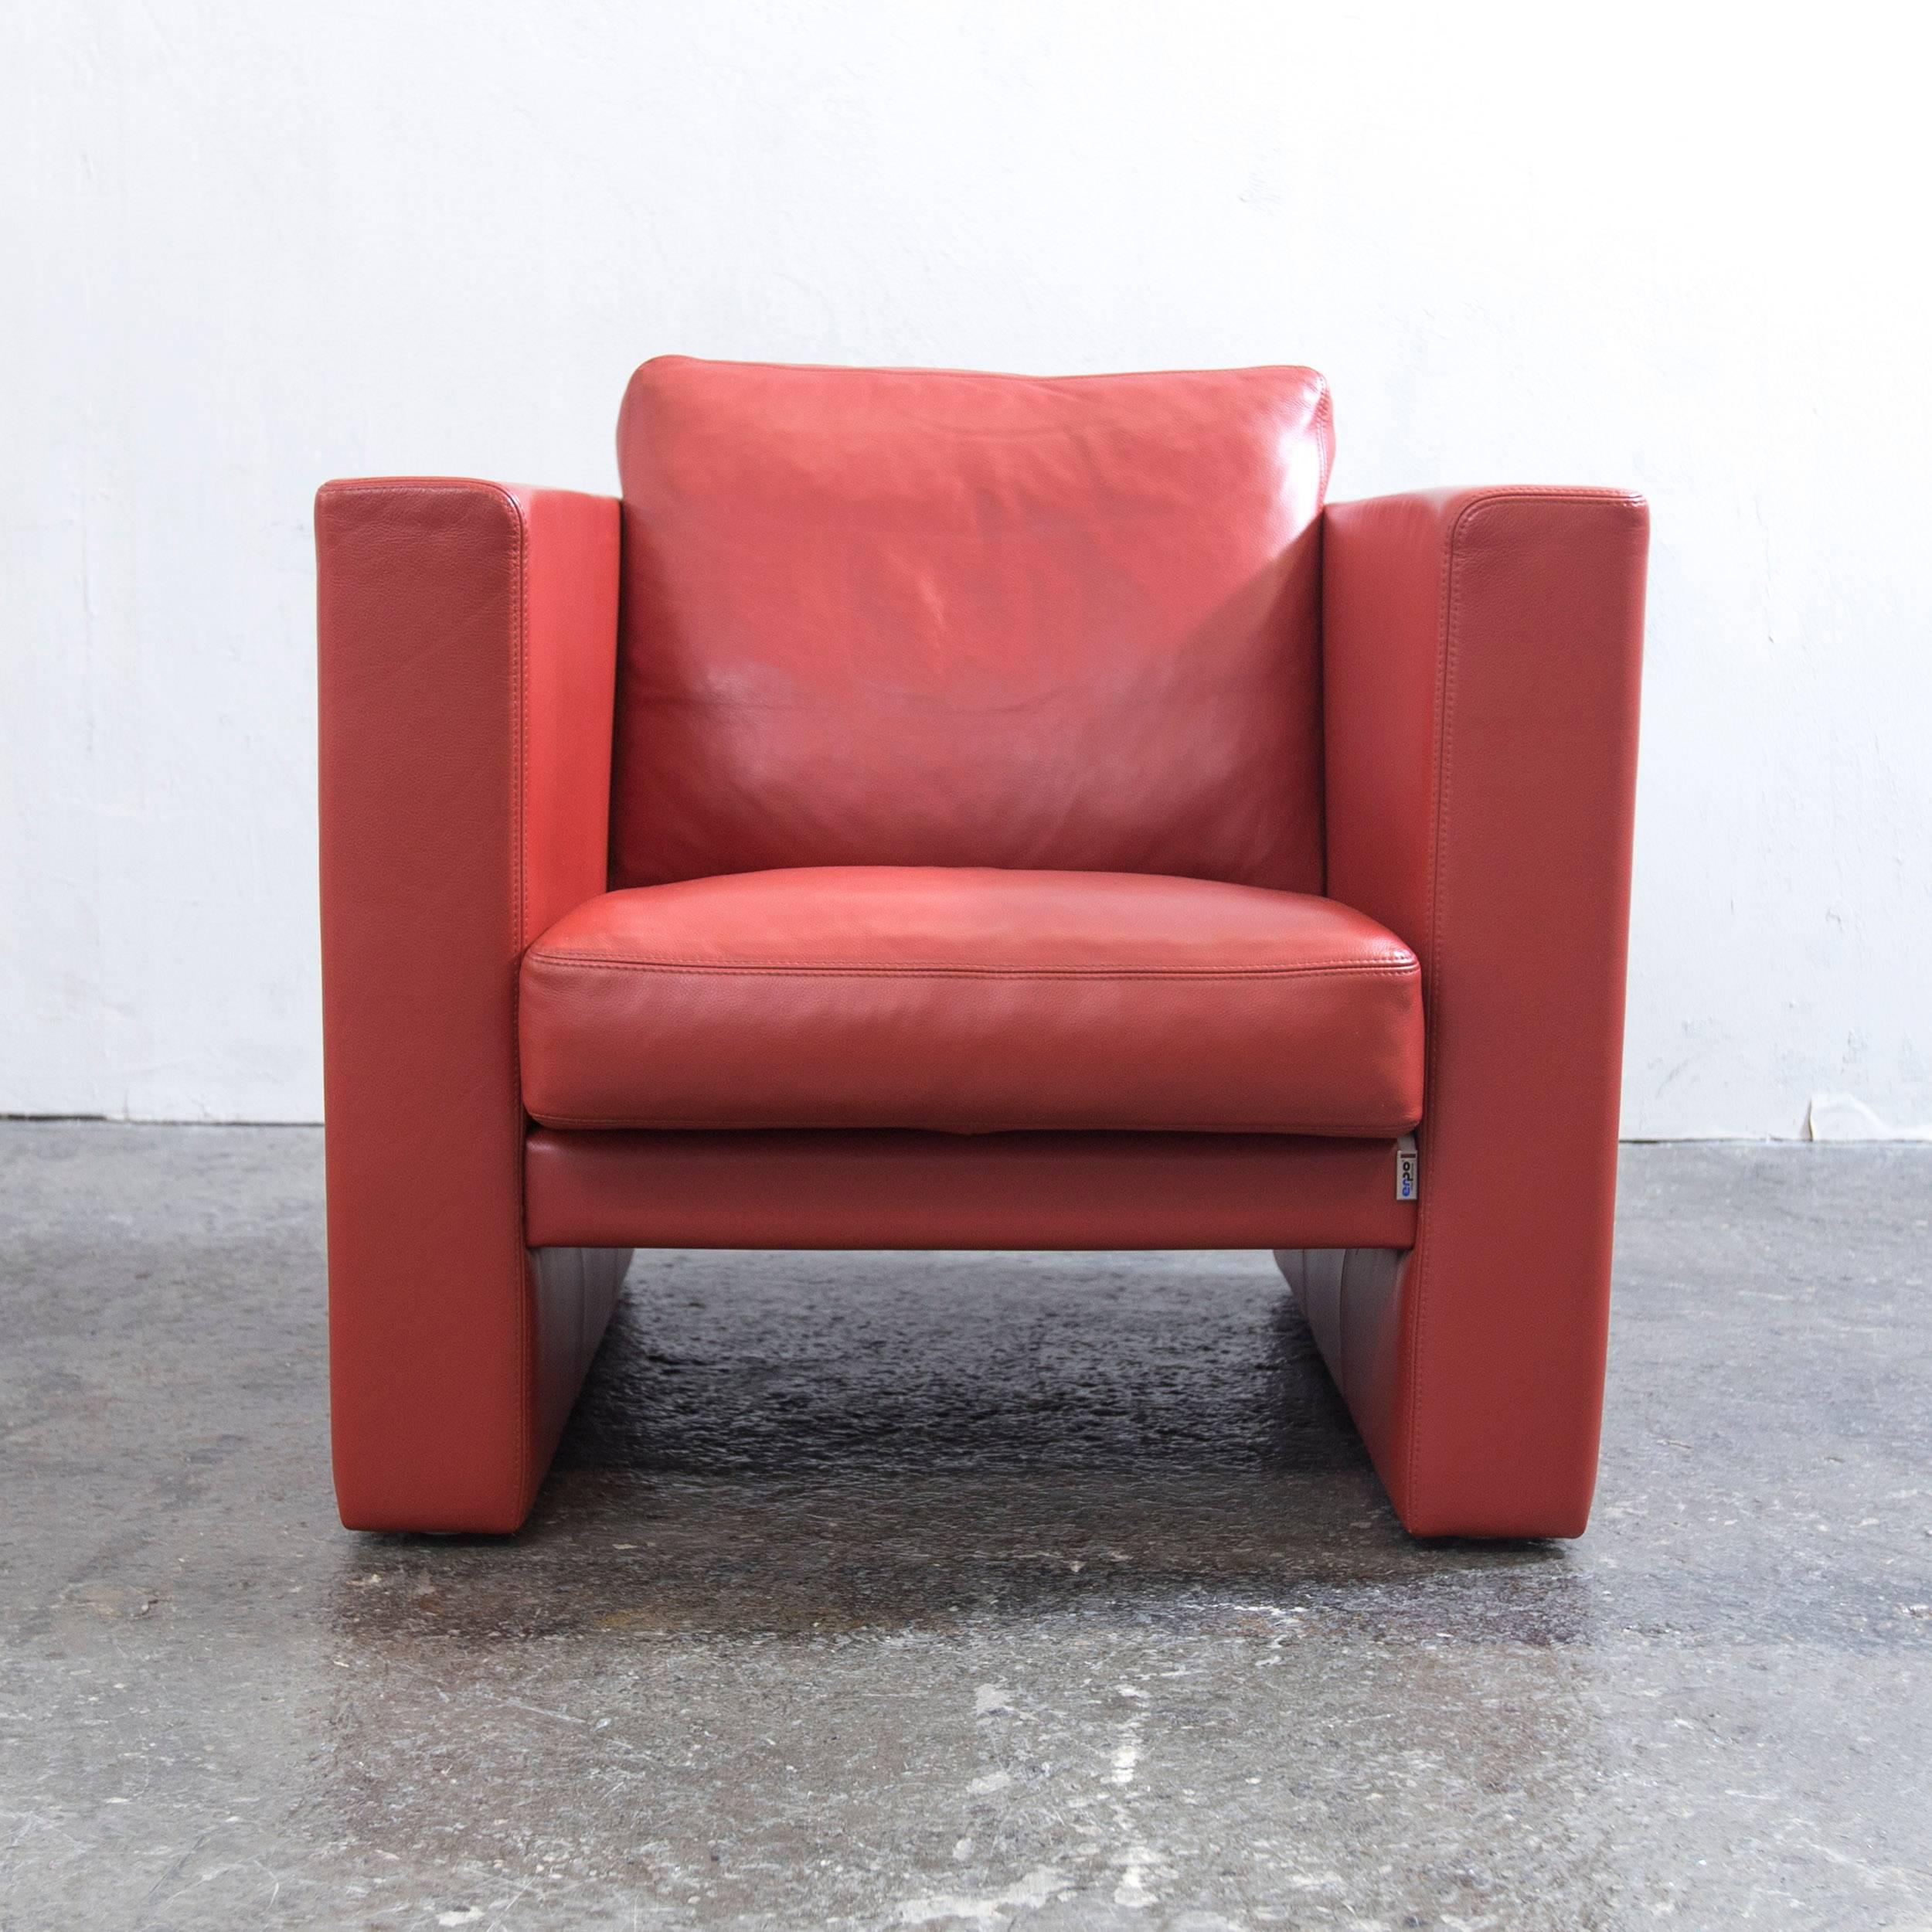 Orange red colored original Erpo designer leather armchair in a minimalistic and modern design, made for pure comfort.